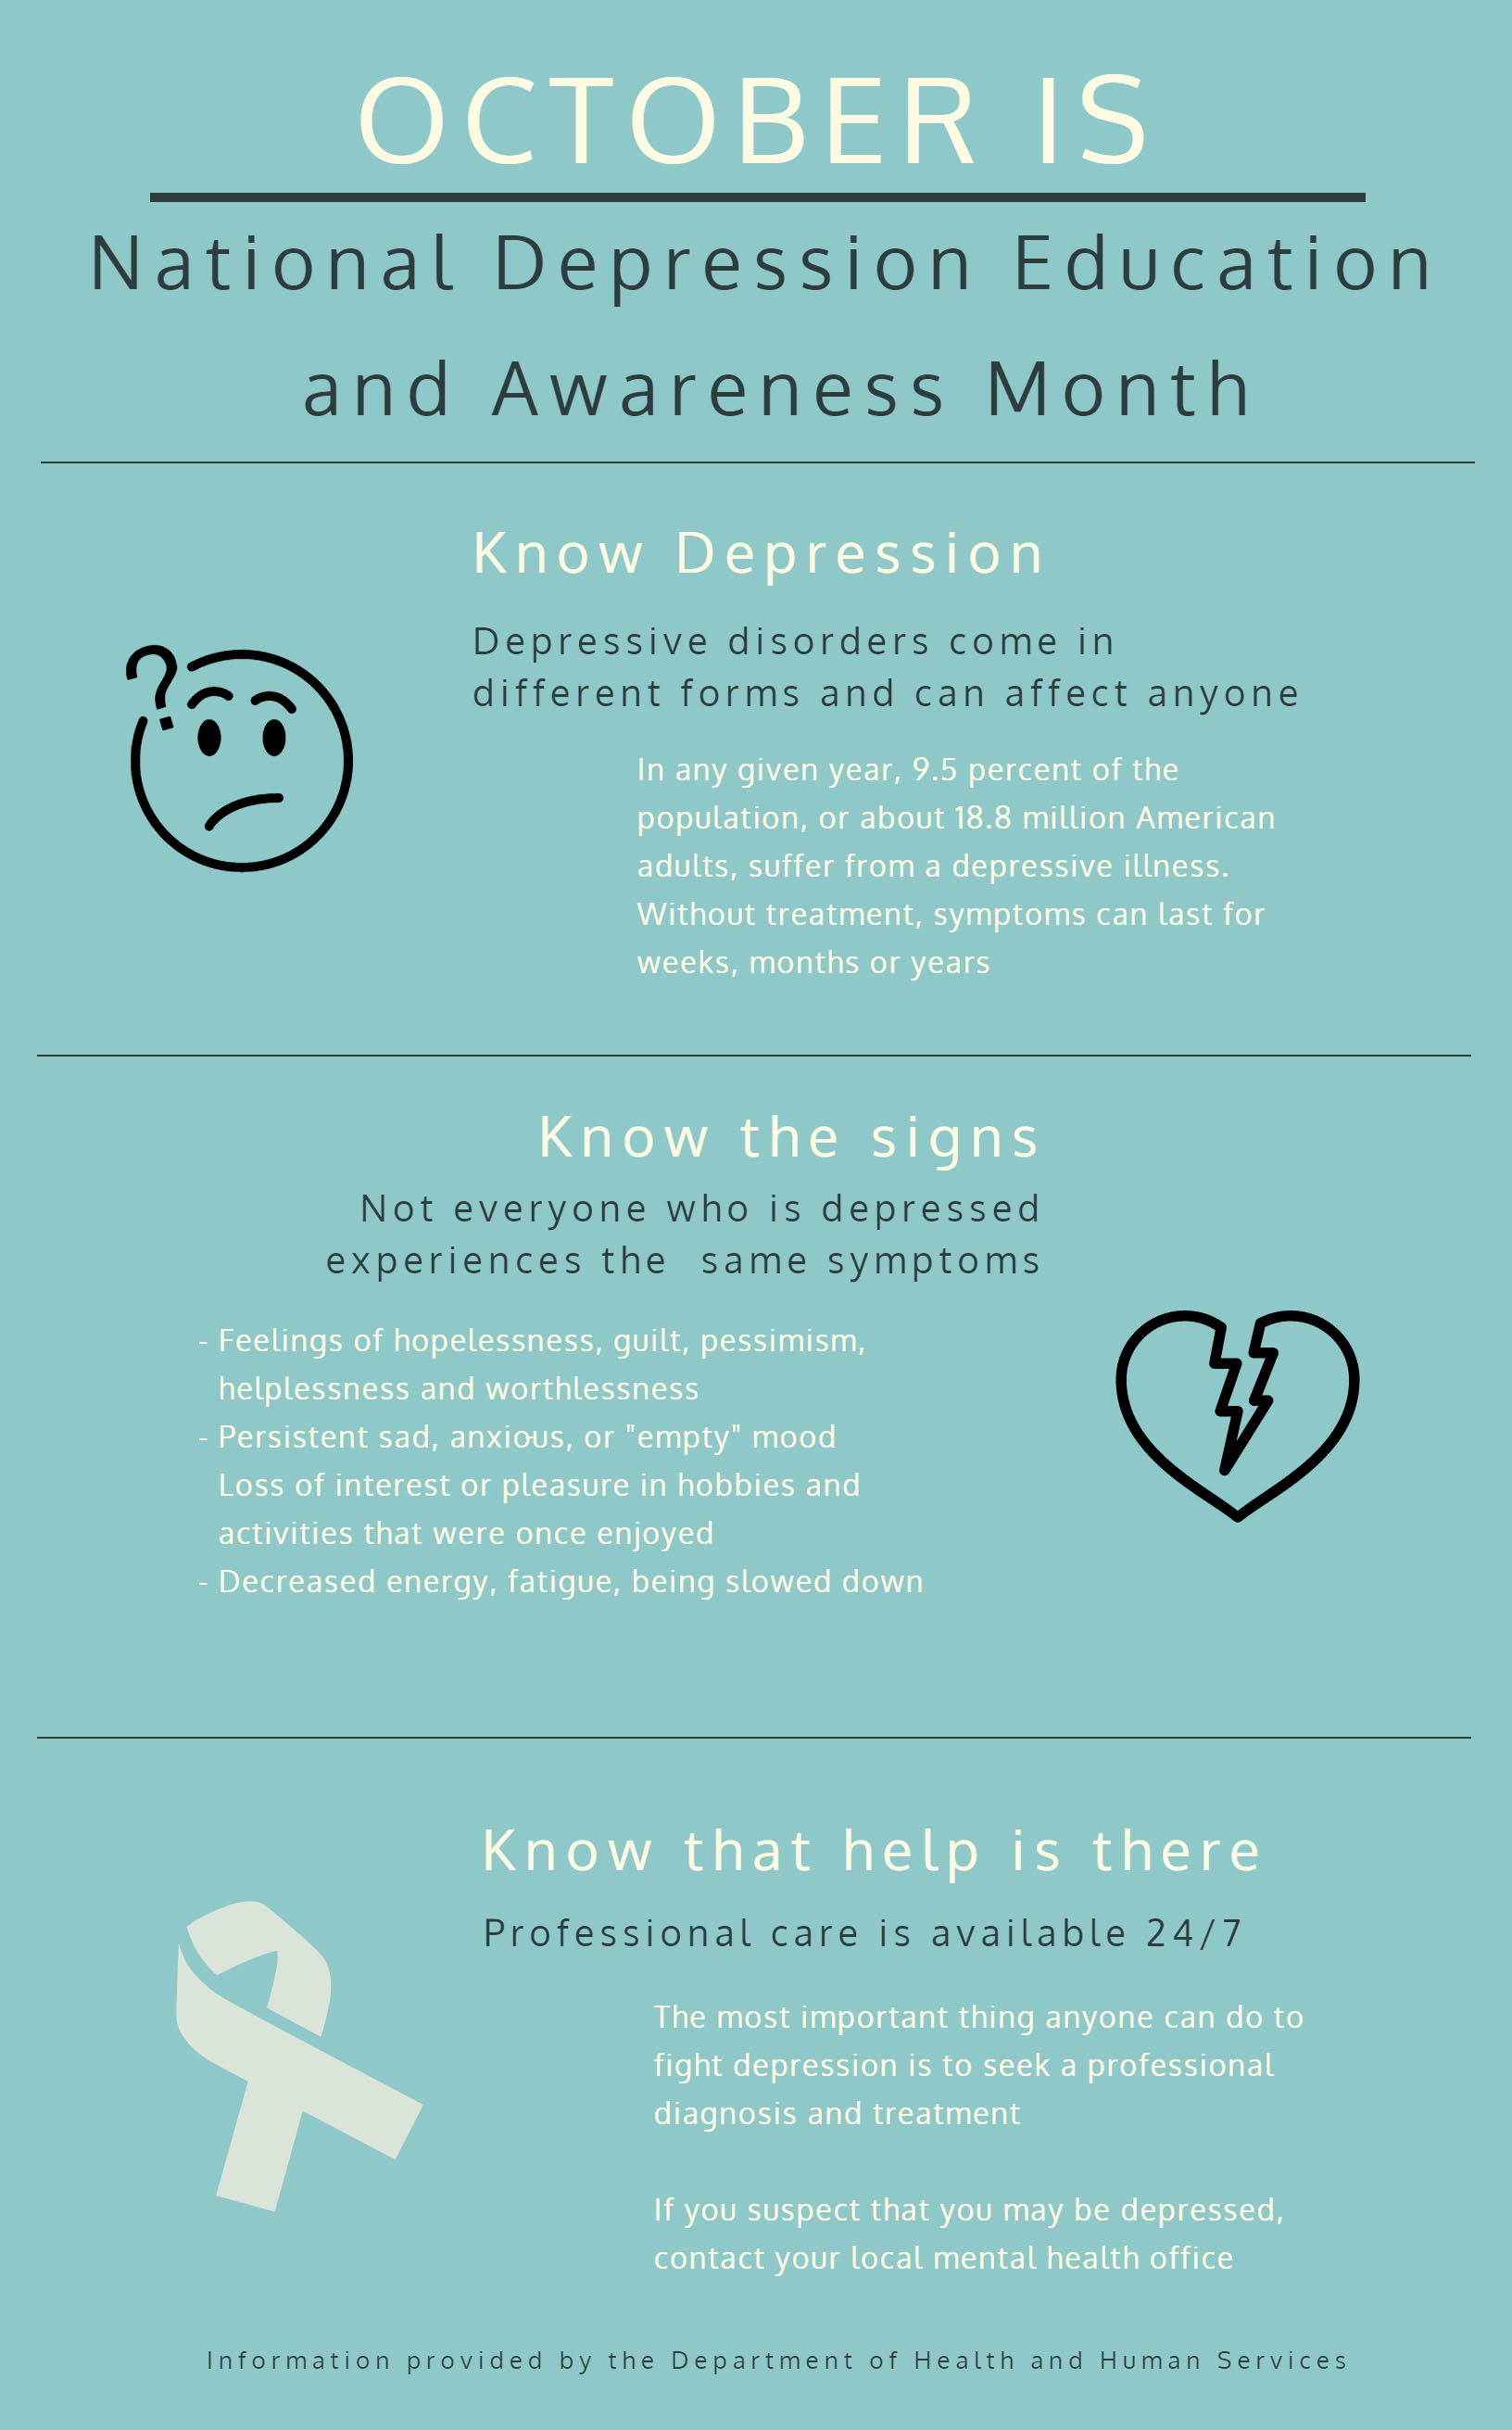 October is National Depression Education and Awareness Month